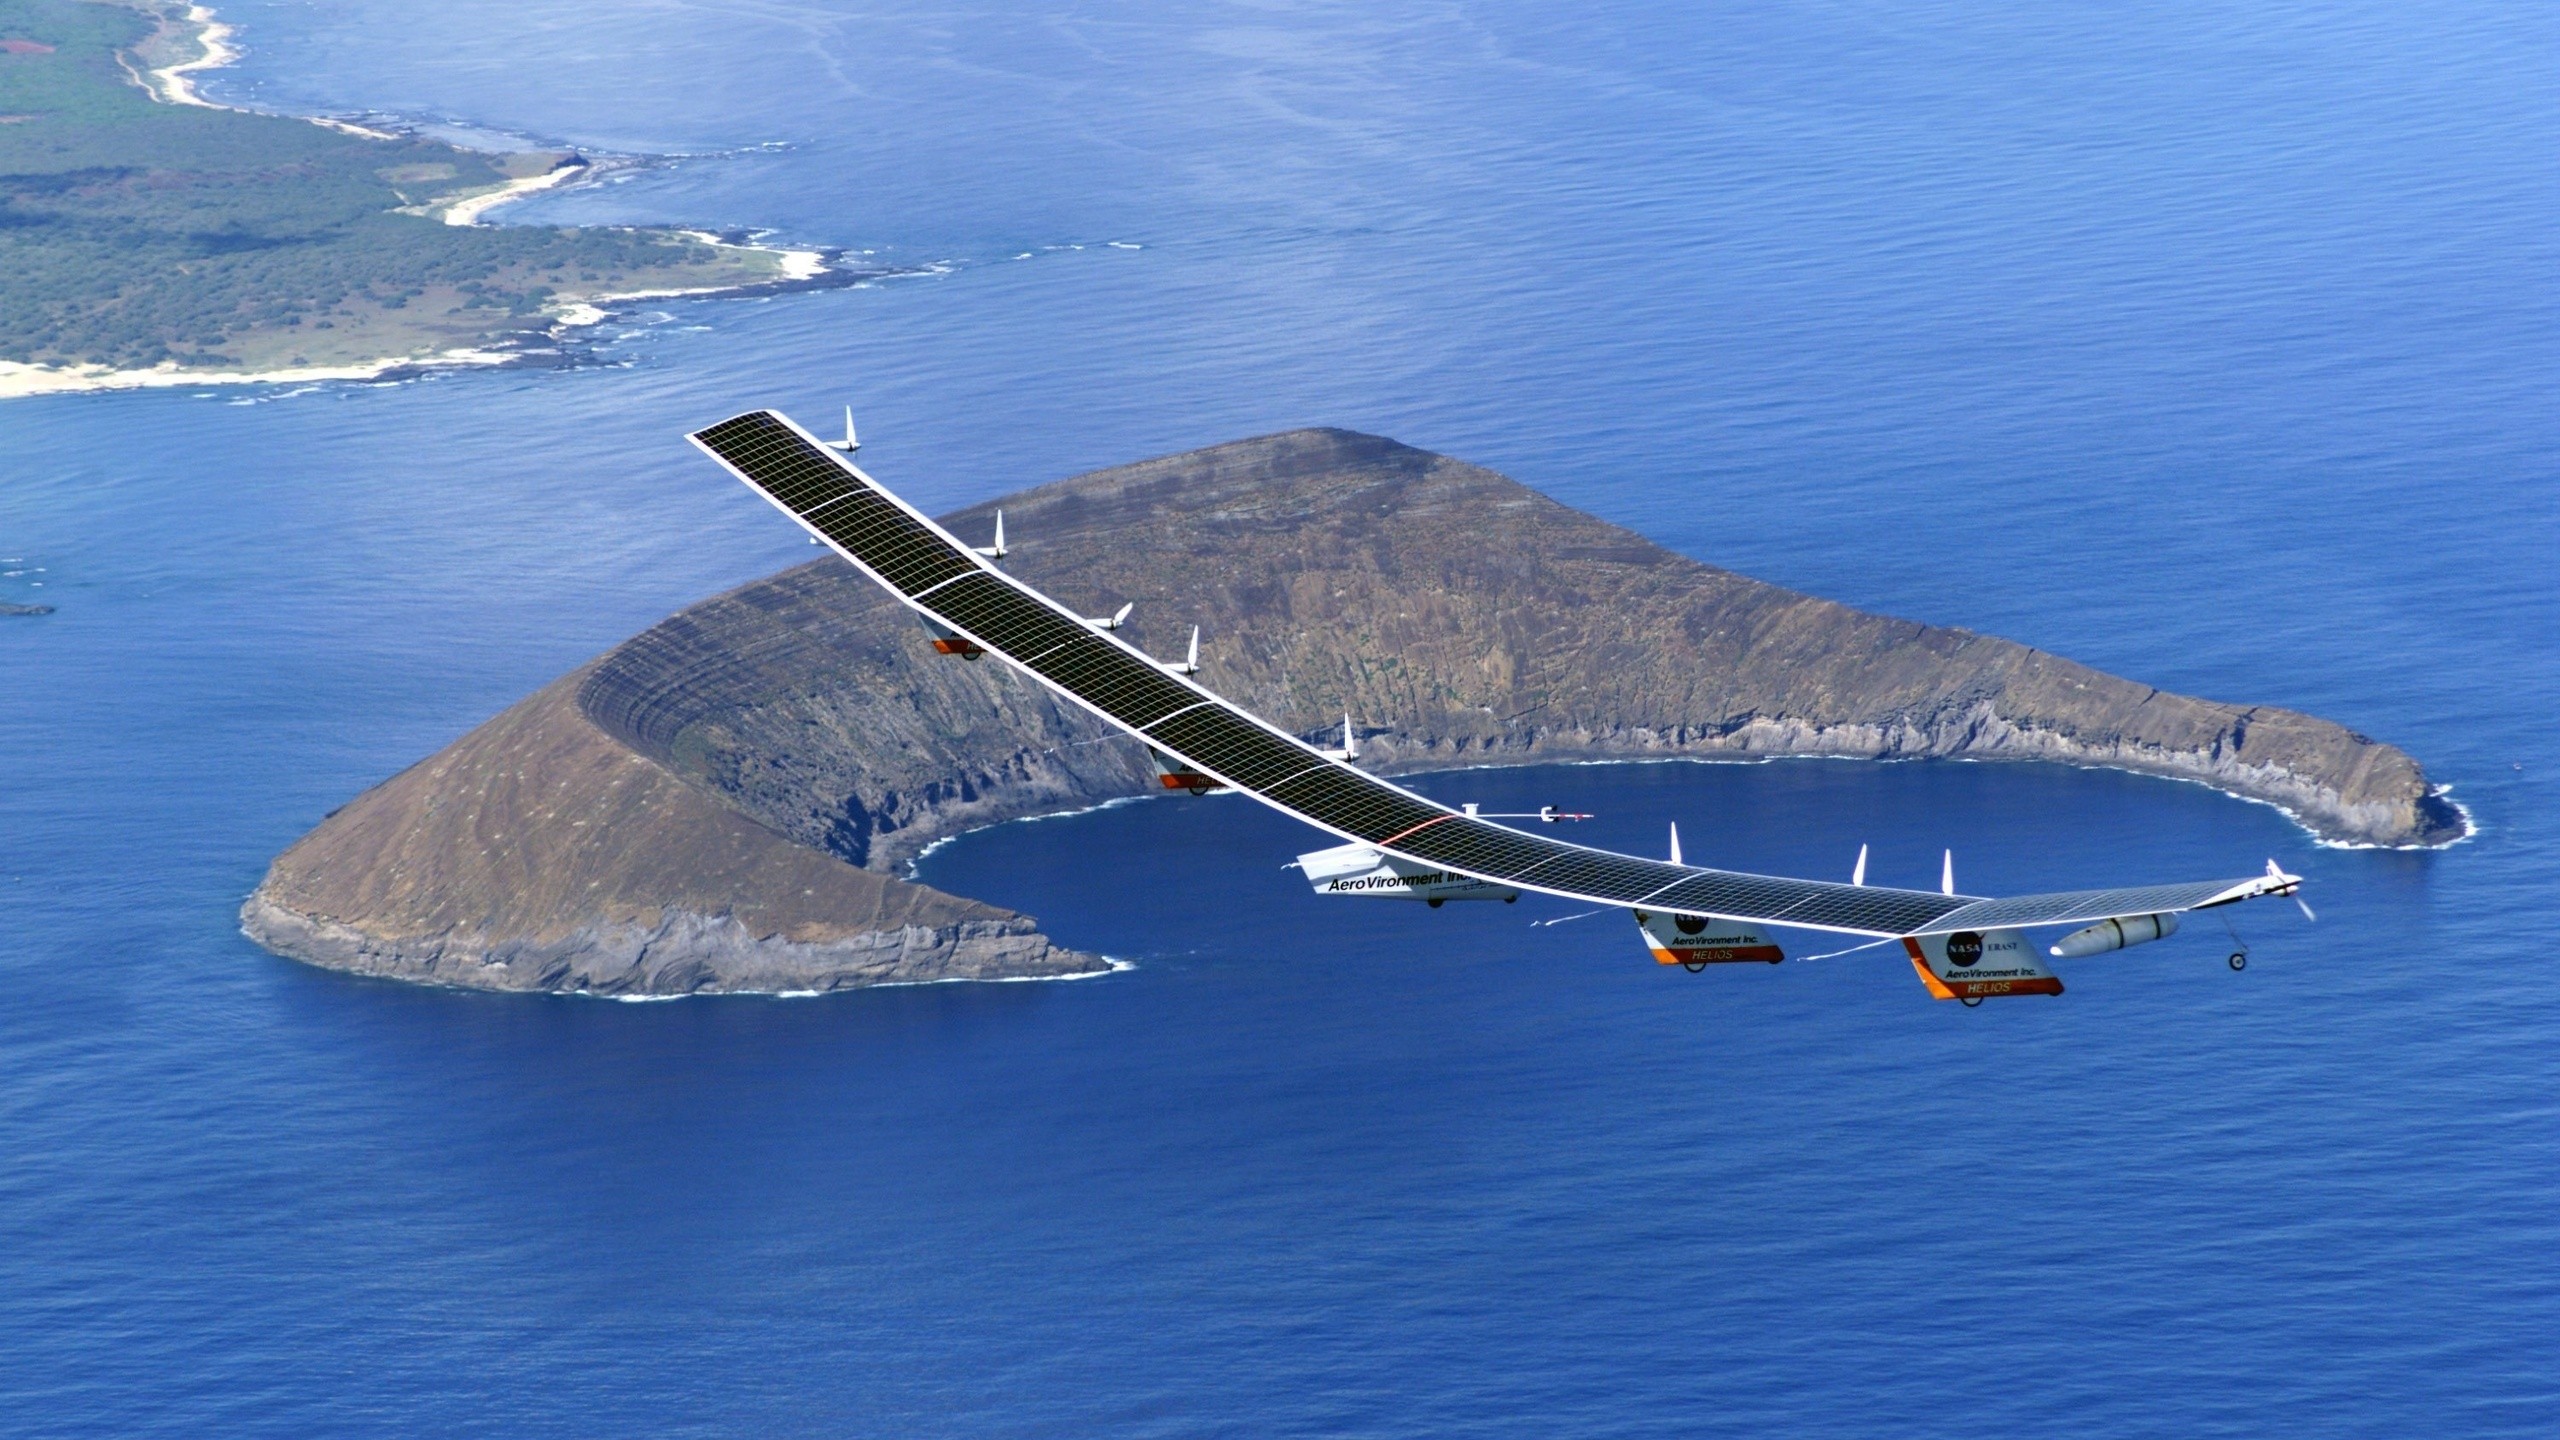 General 2560x1440 vehicle aerial view solar power solar panel aircraft